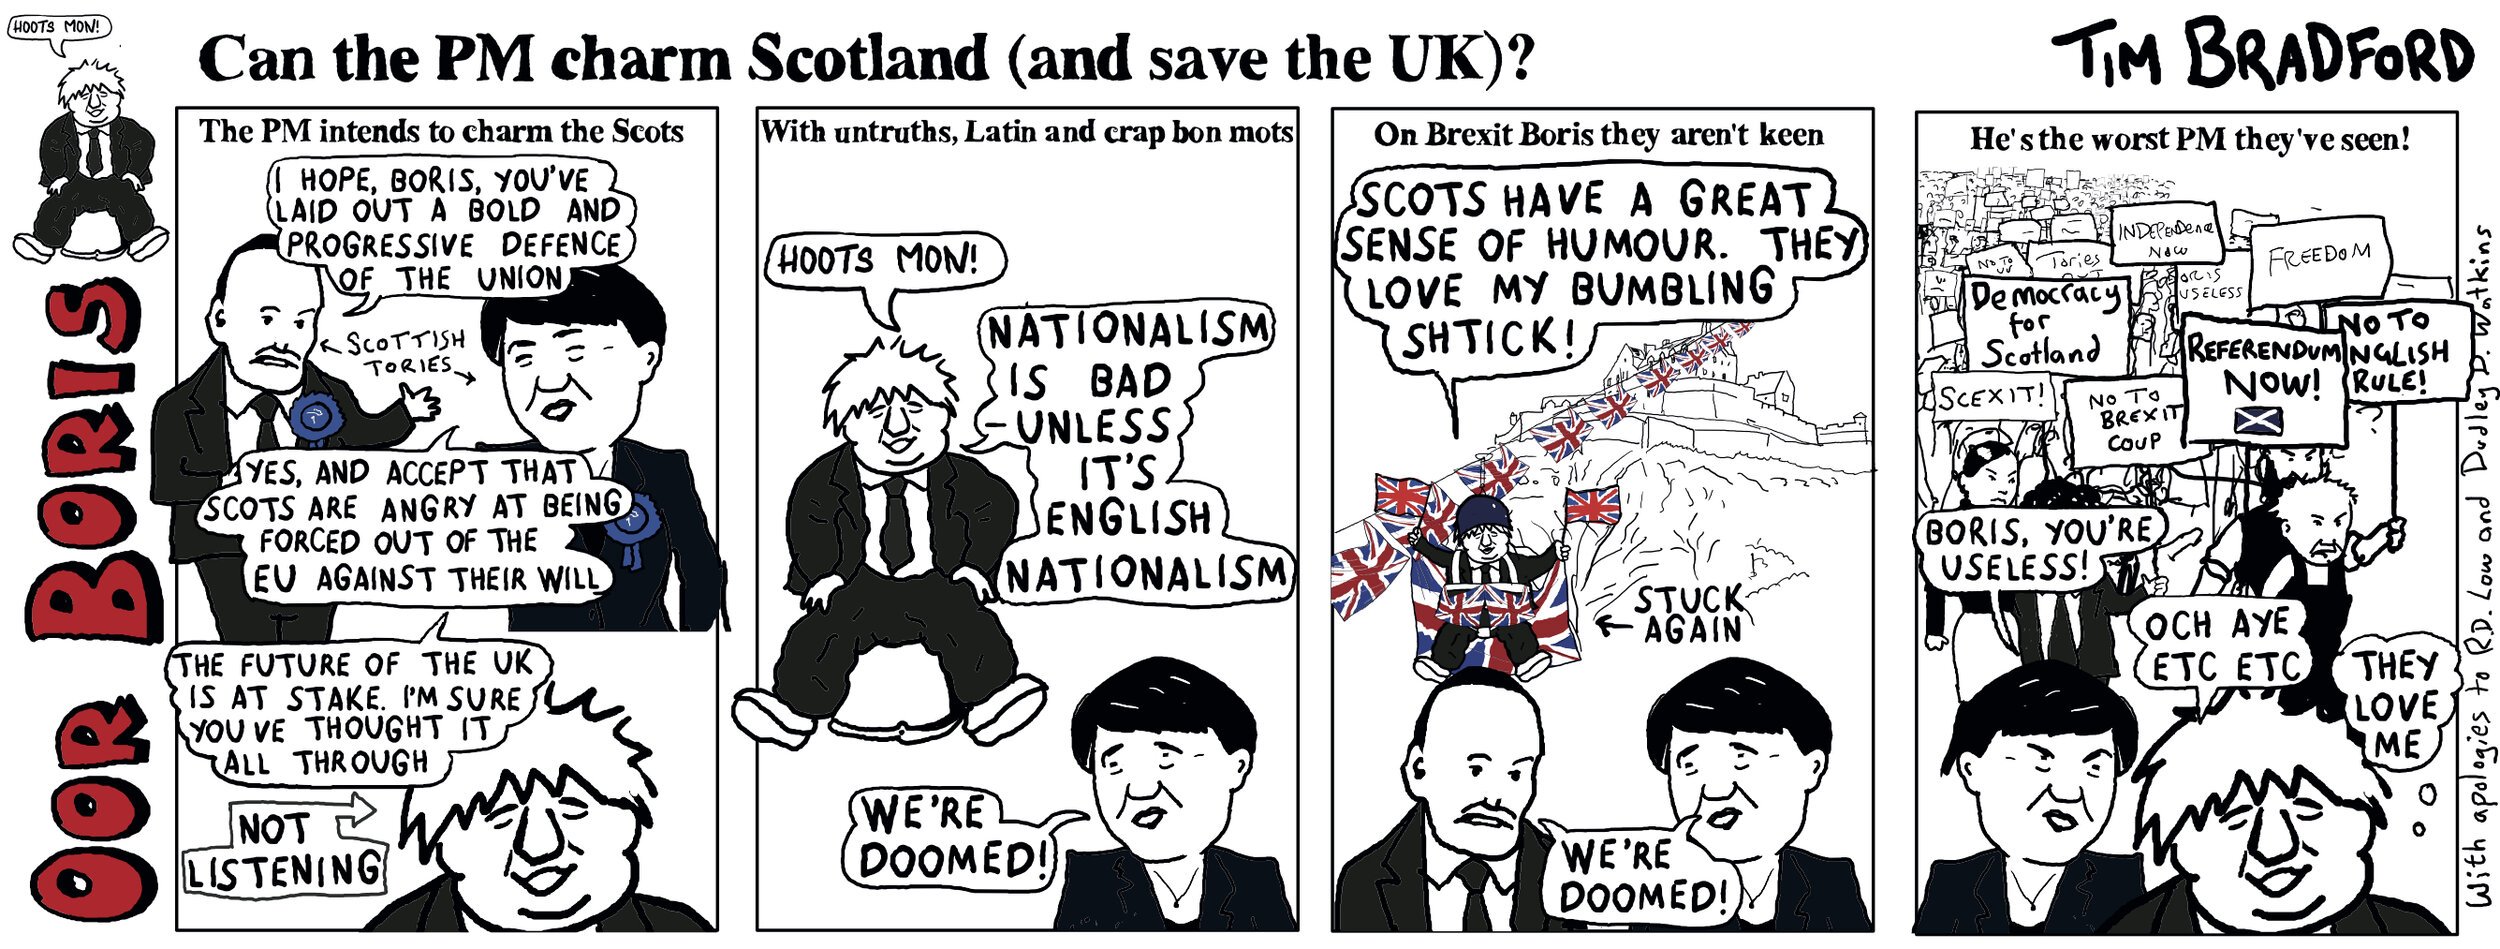 Can the PM charm Scotland (and save the UK?) - 26/01/2021